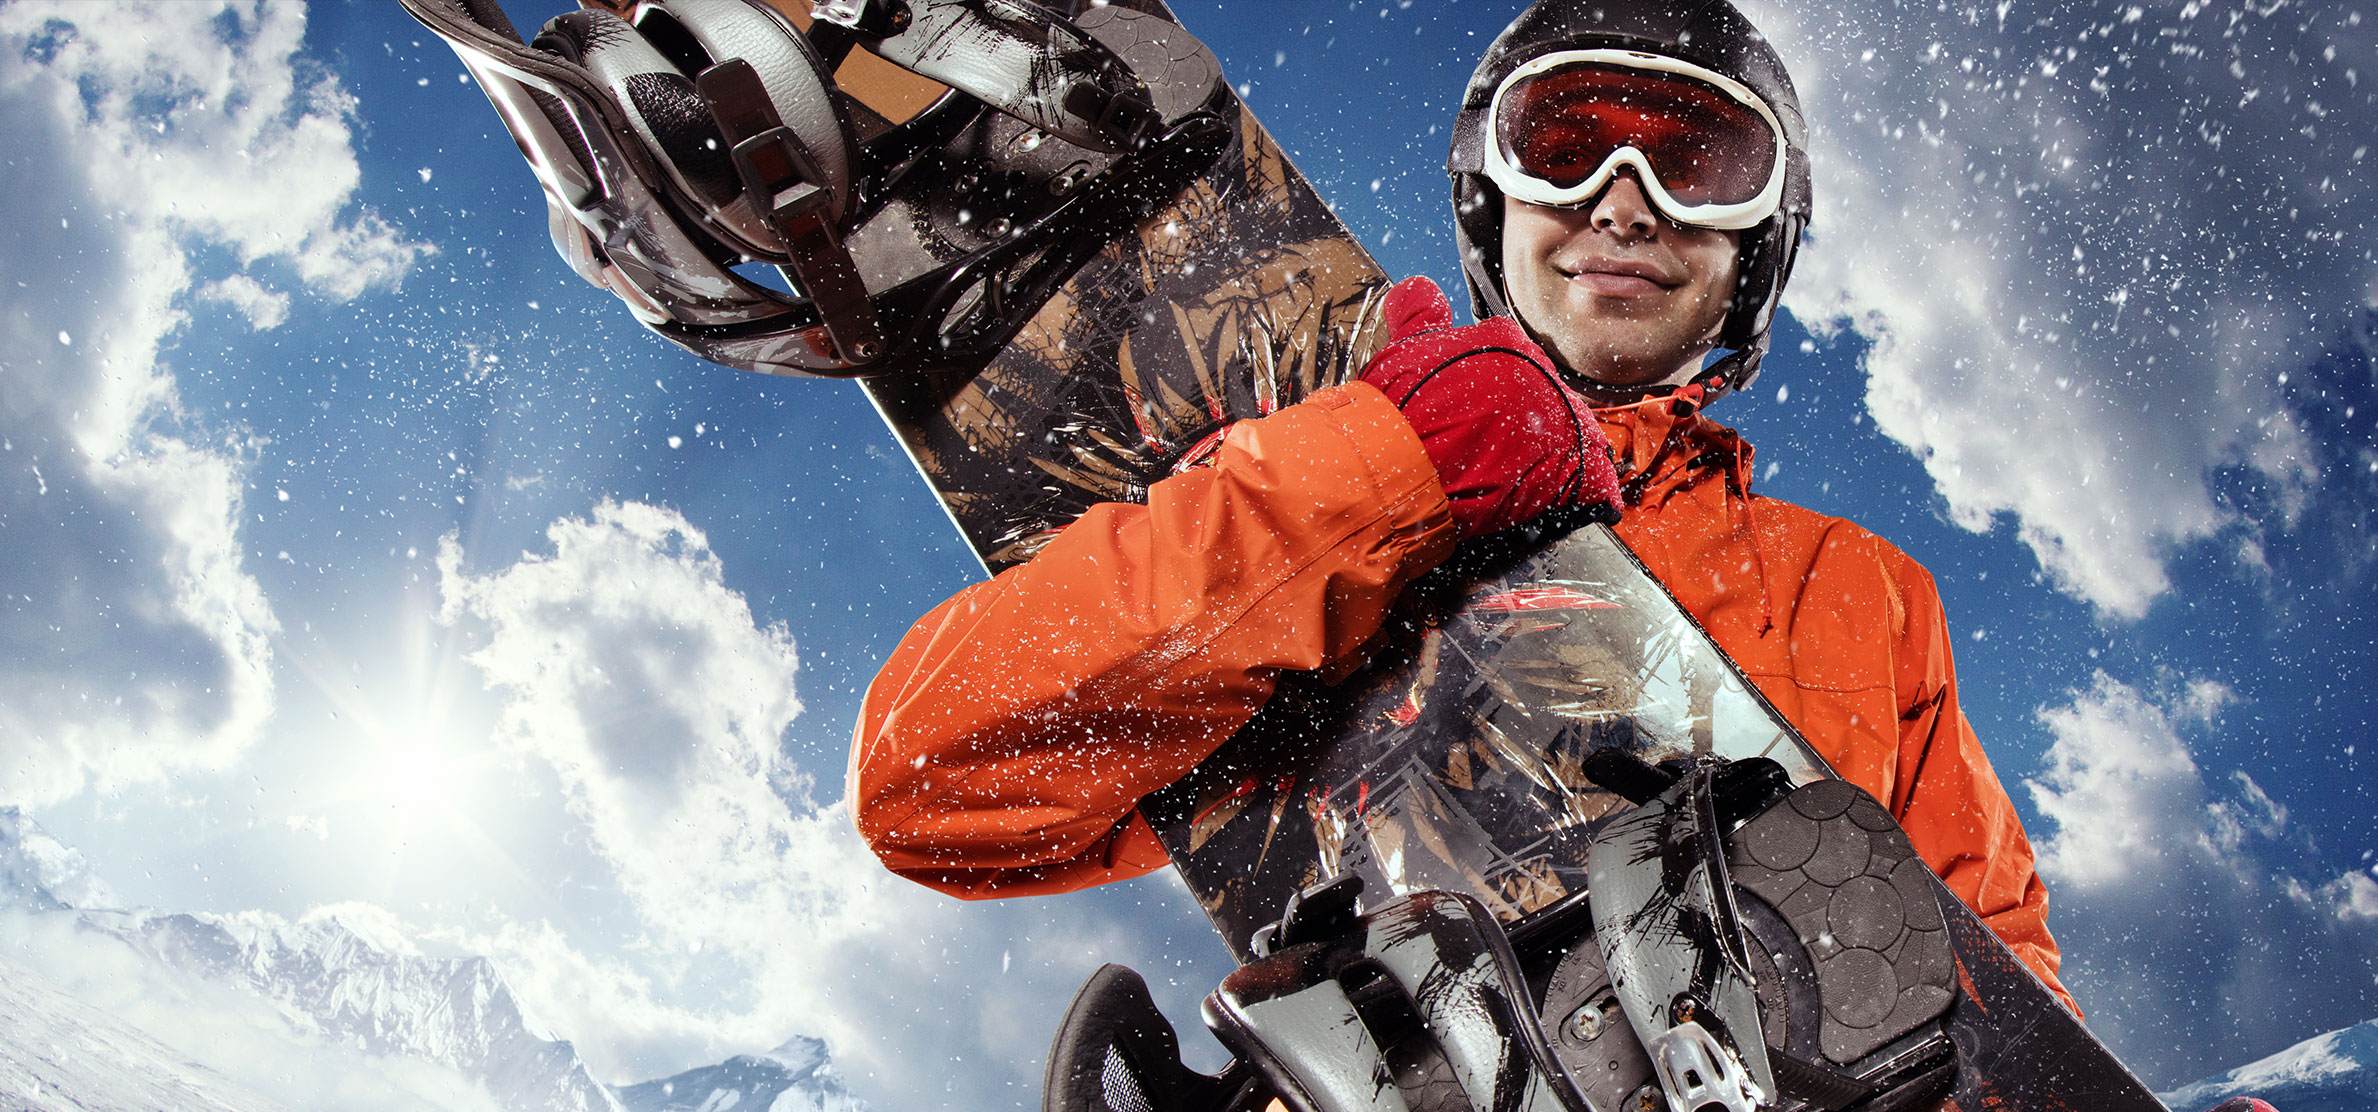 Celerant Integration with Magento for Snow Sports